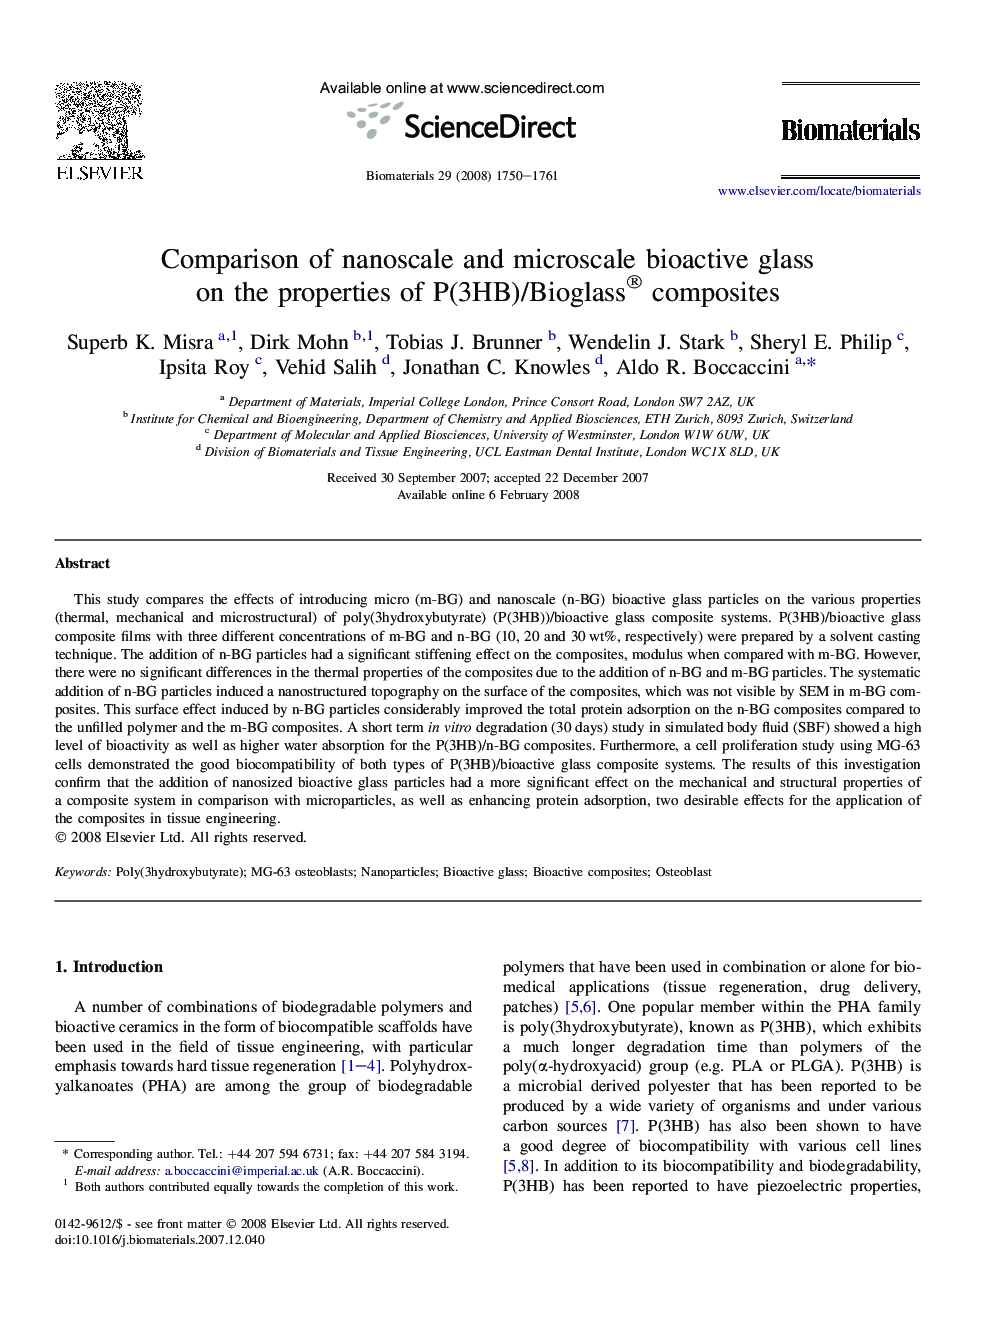 Comparison of nanoscale and microscale bioactive glass on the properties of P(3HB)/Bioglass® composites